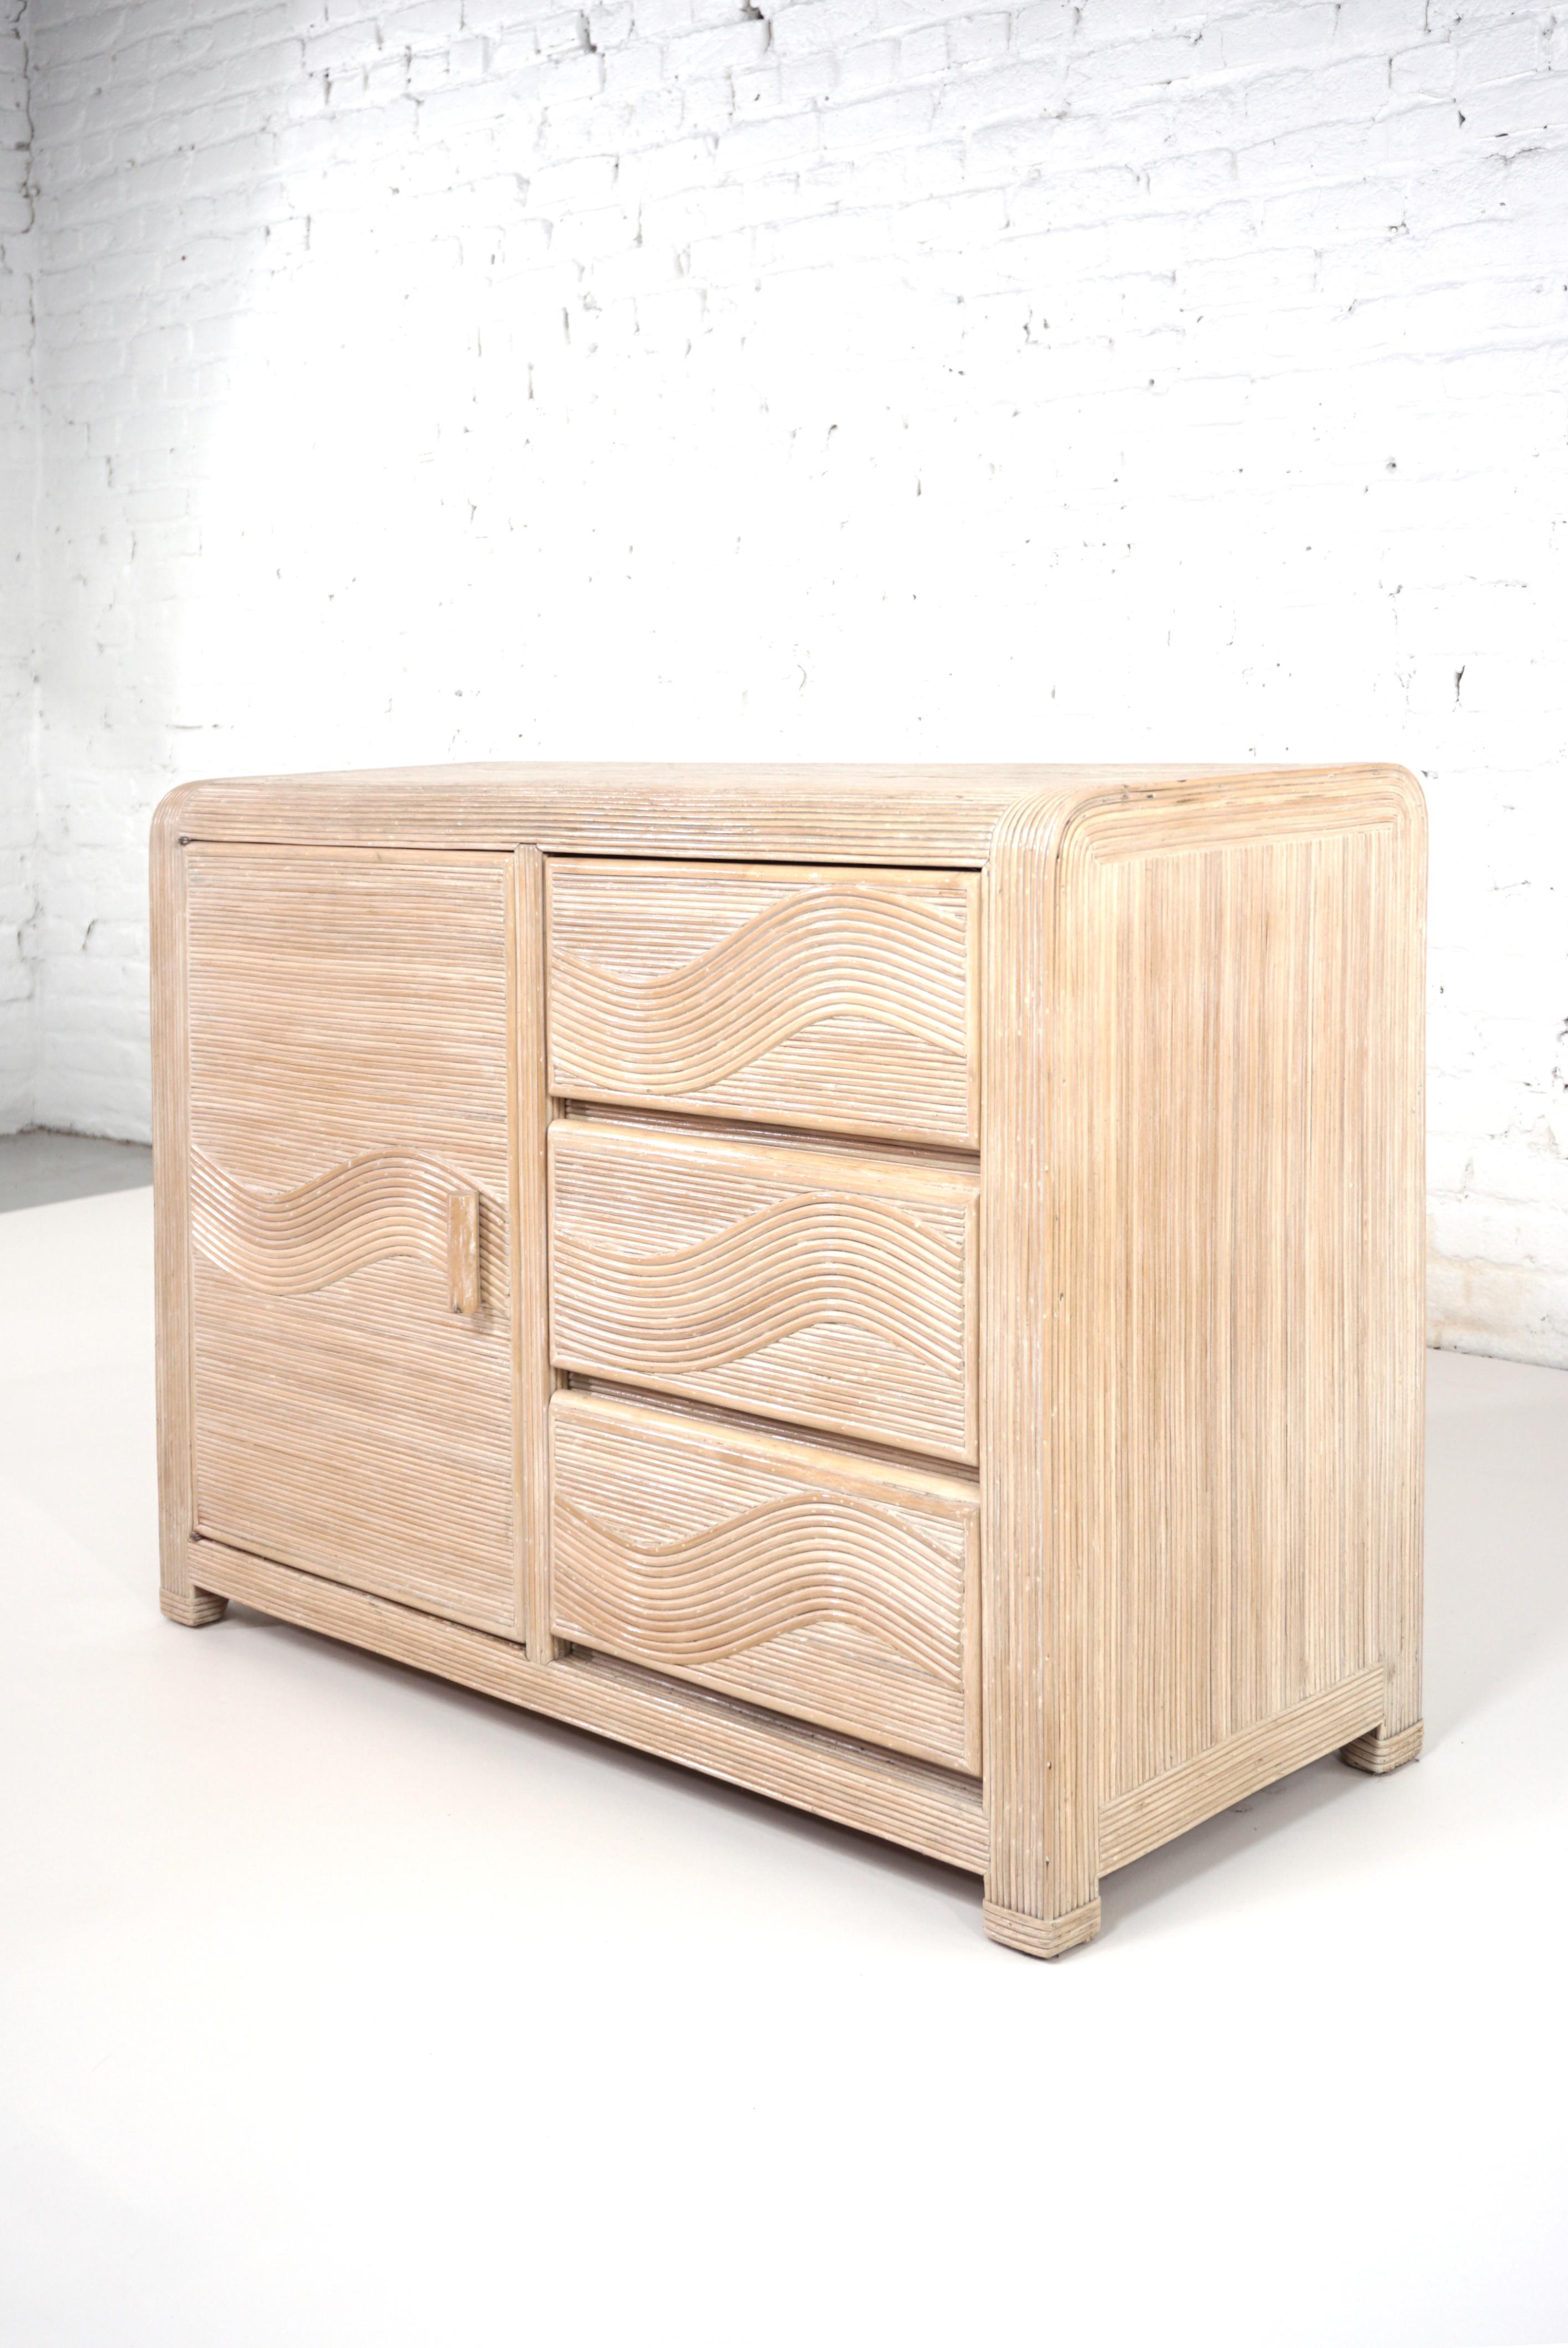 Italian design sideboard consisting of a generous curved wooden structure adorned with graphic pencil reed cerused effect consisting of a shelves spaces and drawers.